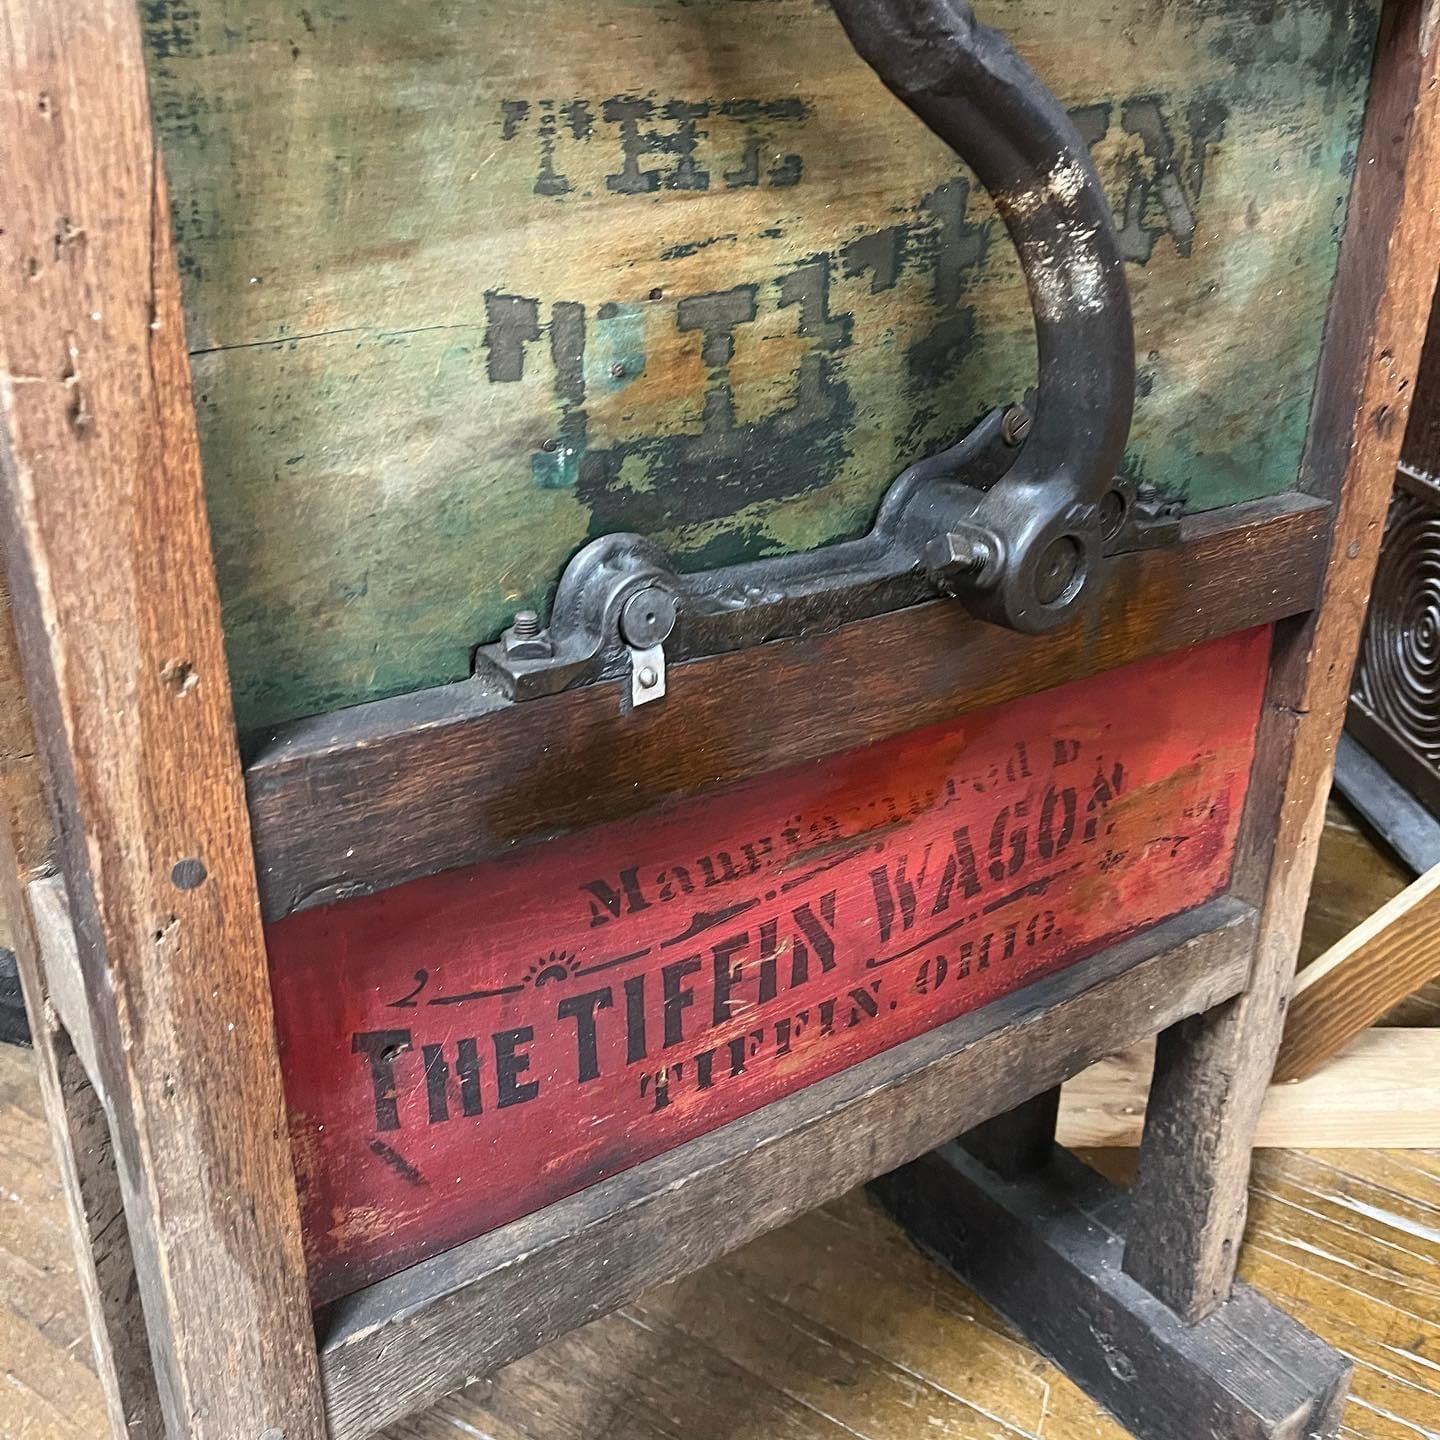 Antique Field Corn Sheller Made By Tiffin Wagon Co.